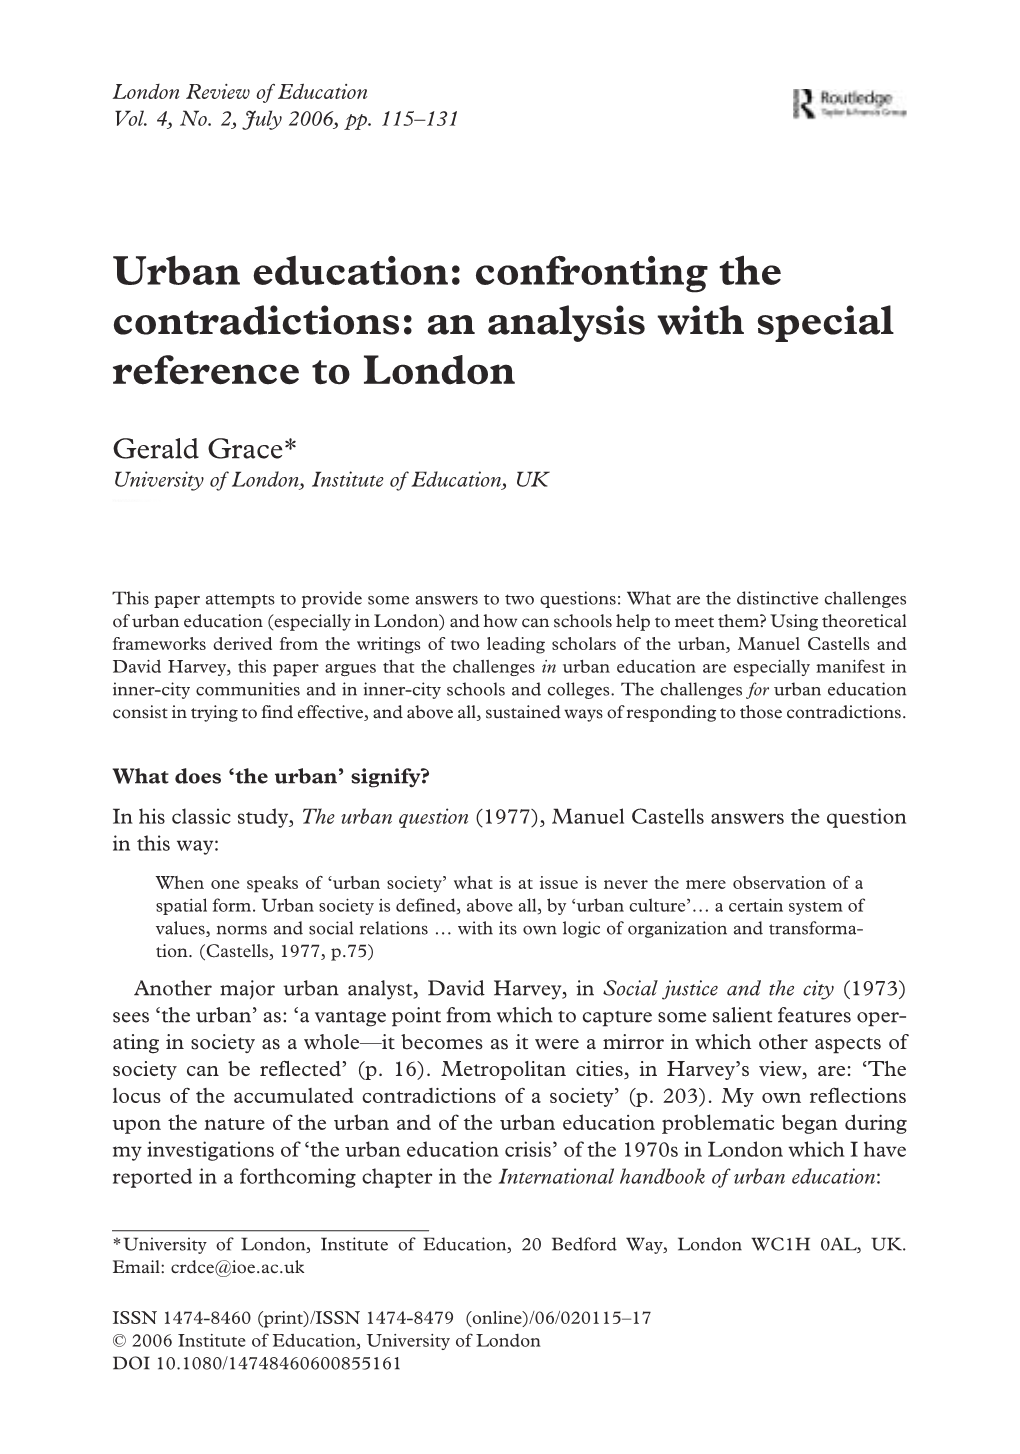 Urban Education: Confronting the Contradictions: an Analysis with Special Reference to London